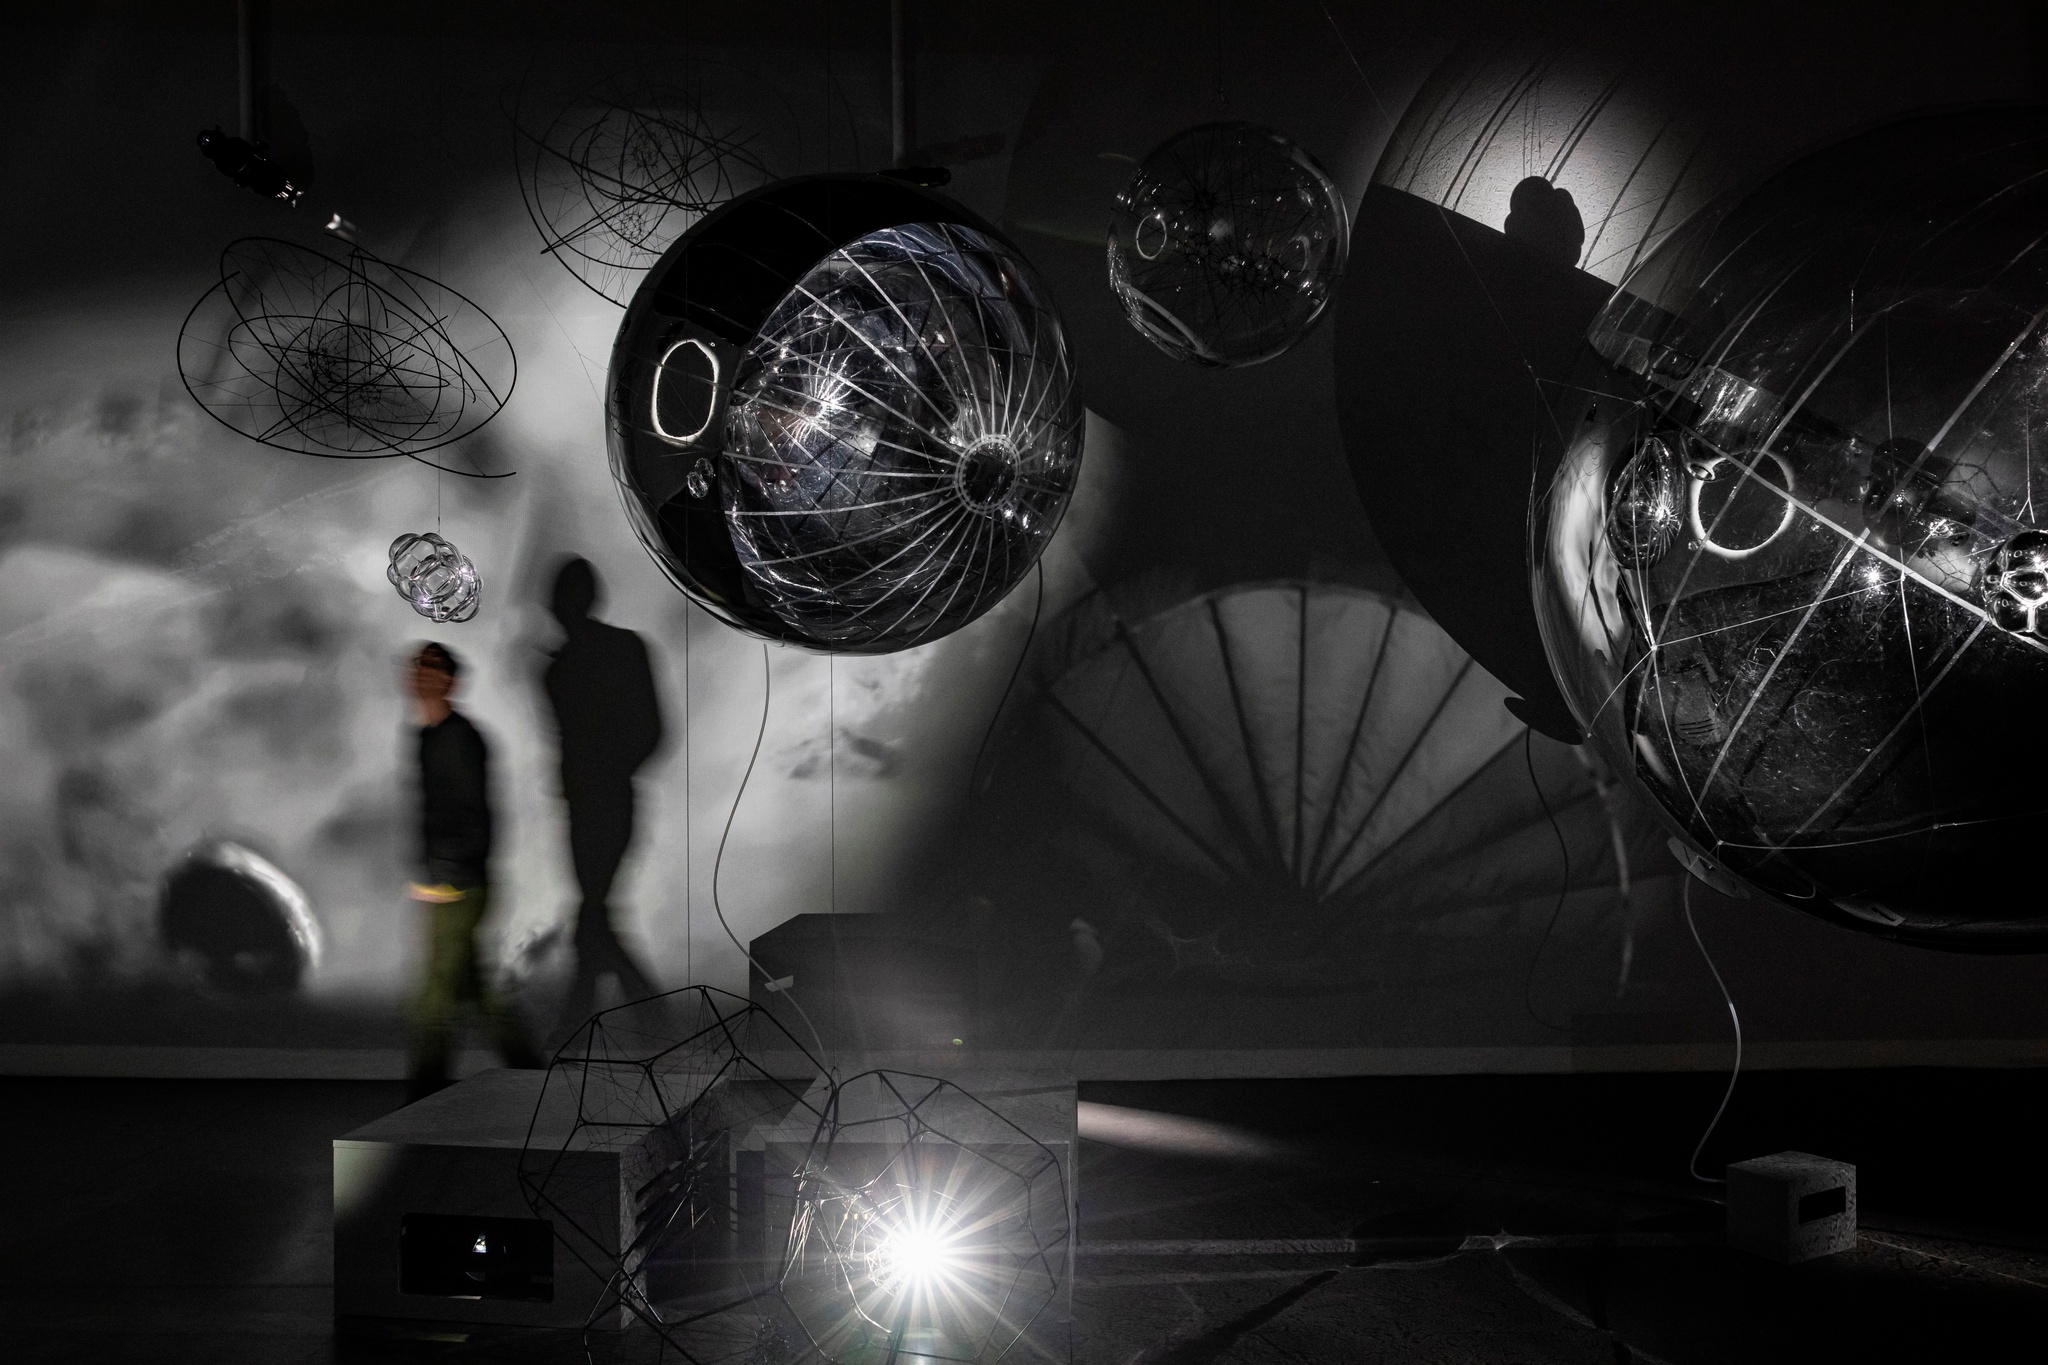 A person walks through a shadowy gallery space, among the play of shadows and reflections cast by large spherical sculptural objects hanging in the space